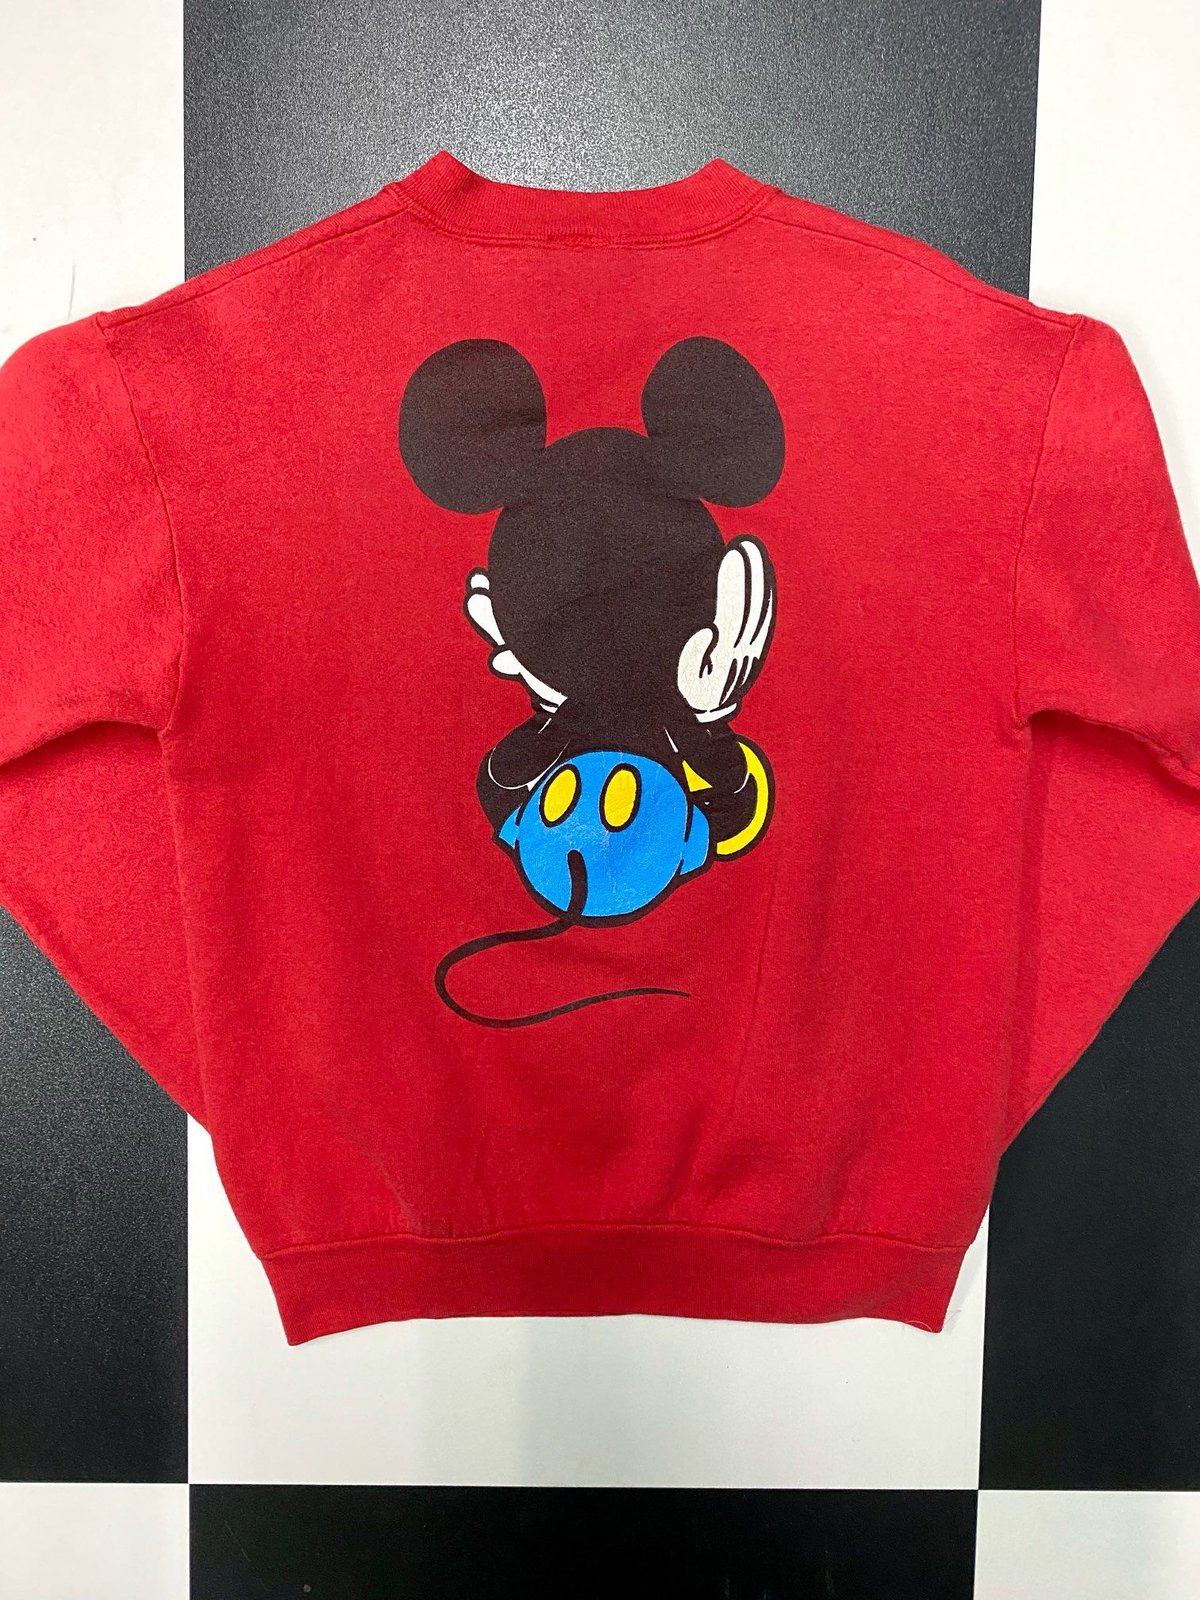 vintage／90s Mickey Mouse trainer | 古着屋 BIG BABY